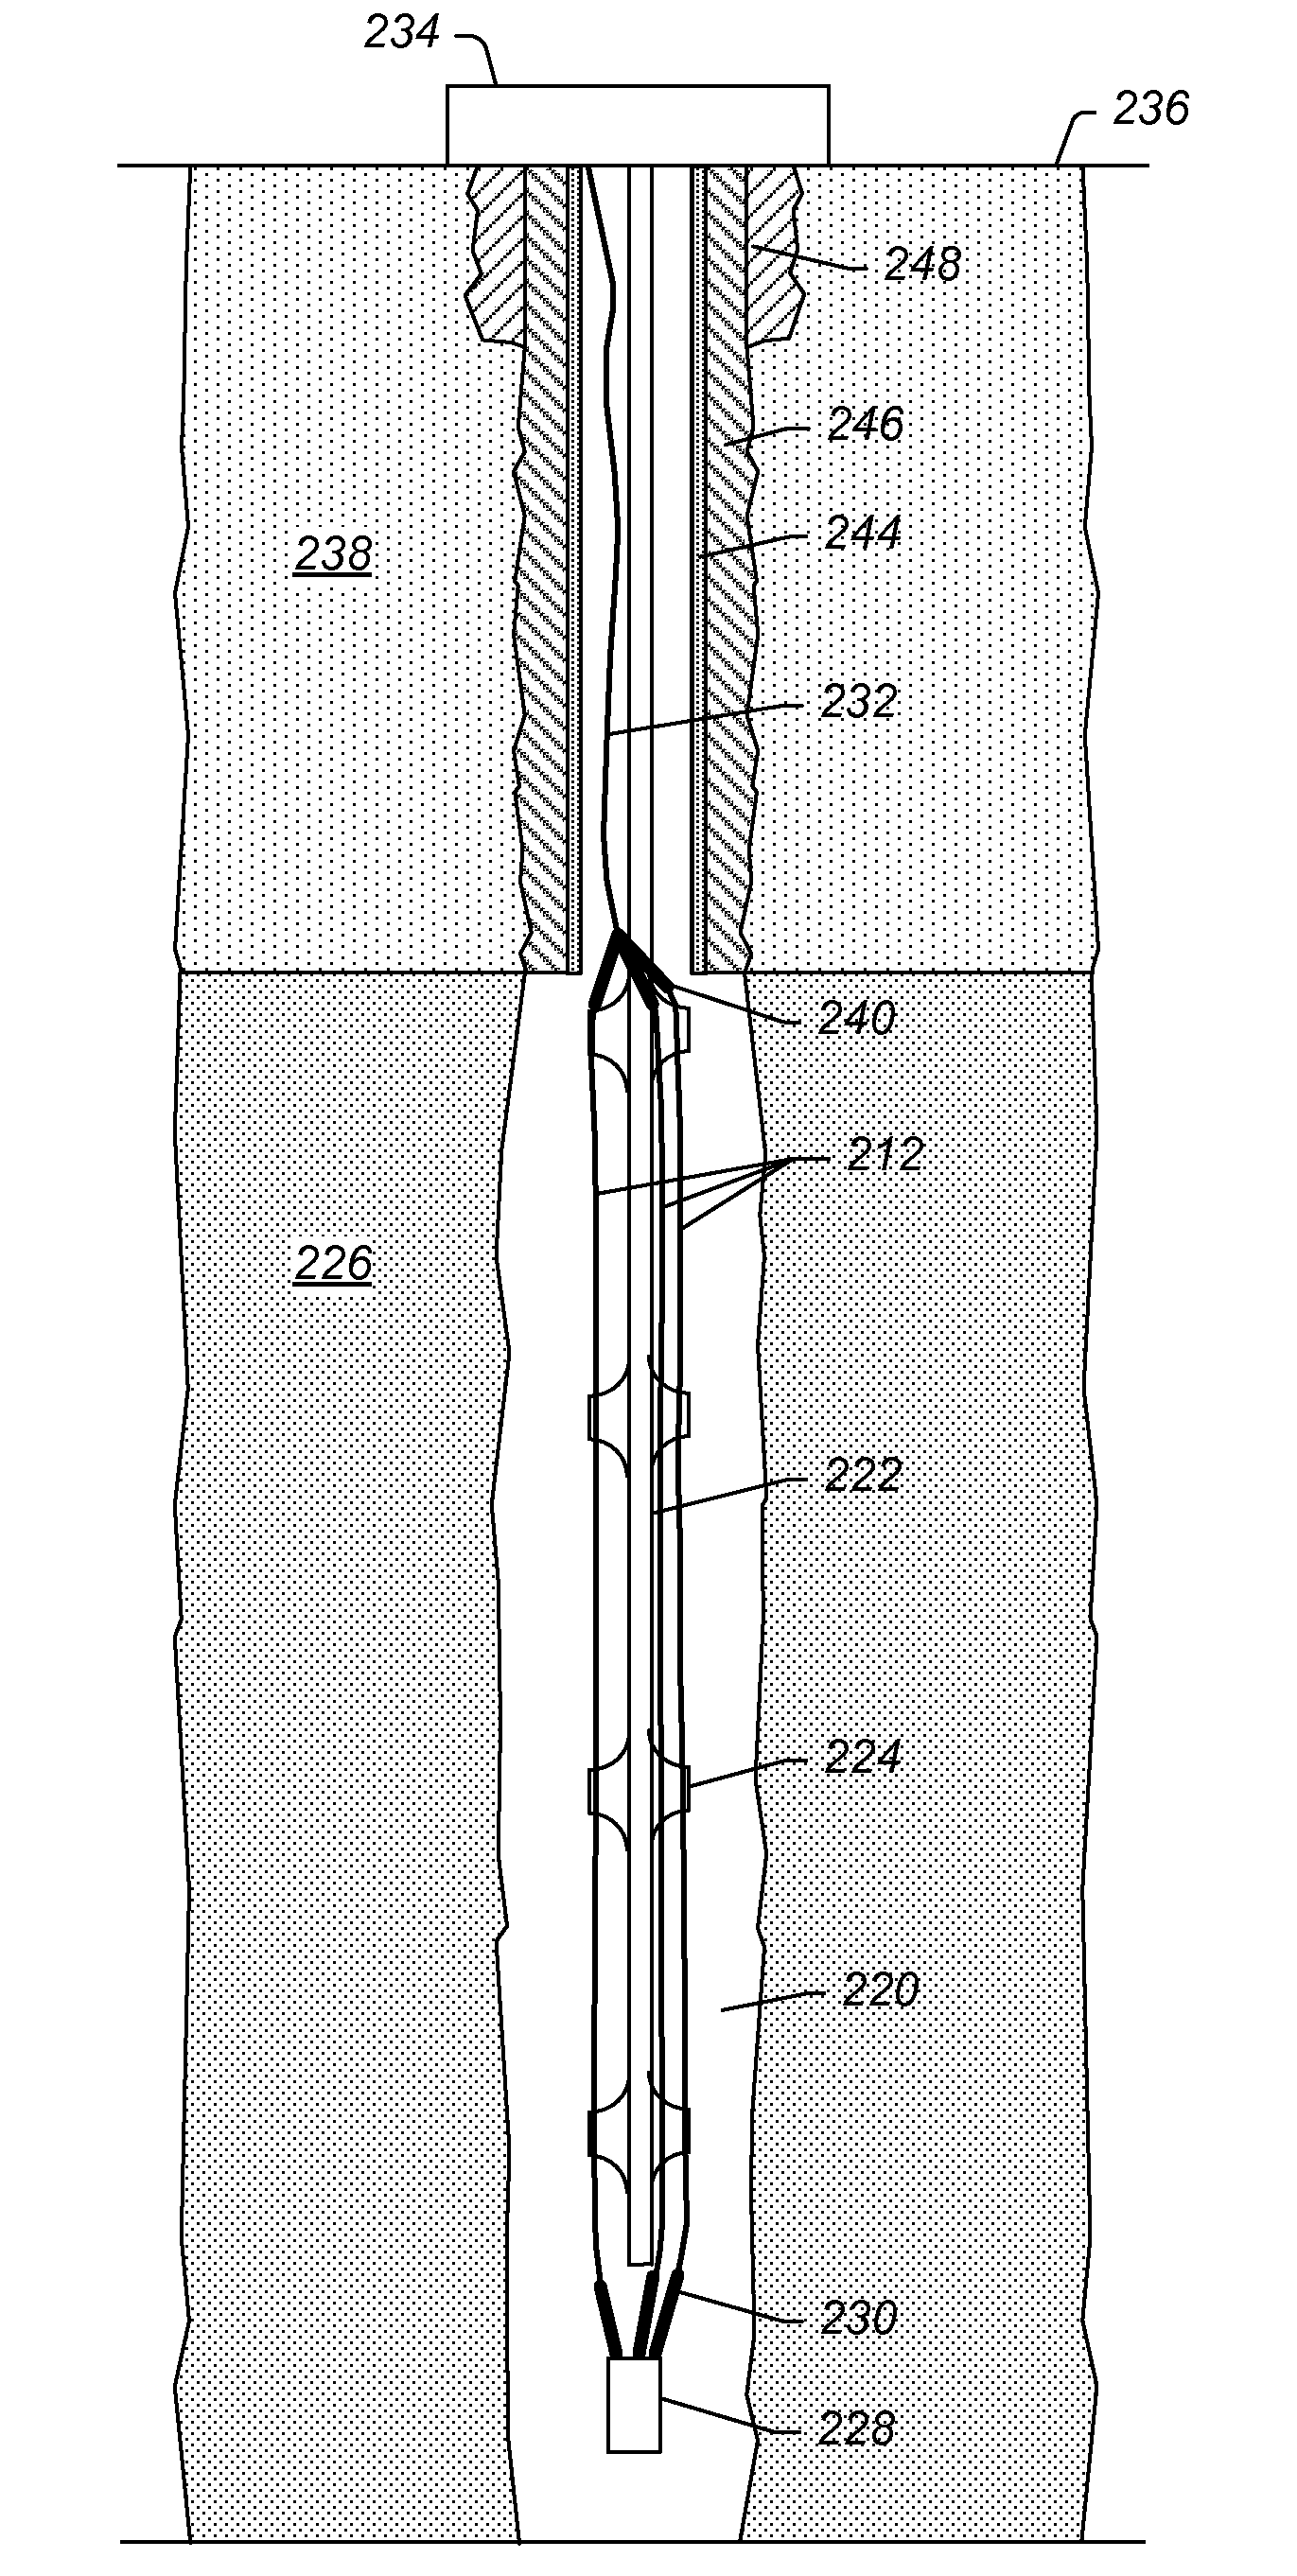 Hydroformed splice for insulated conductors